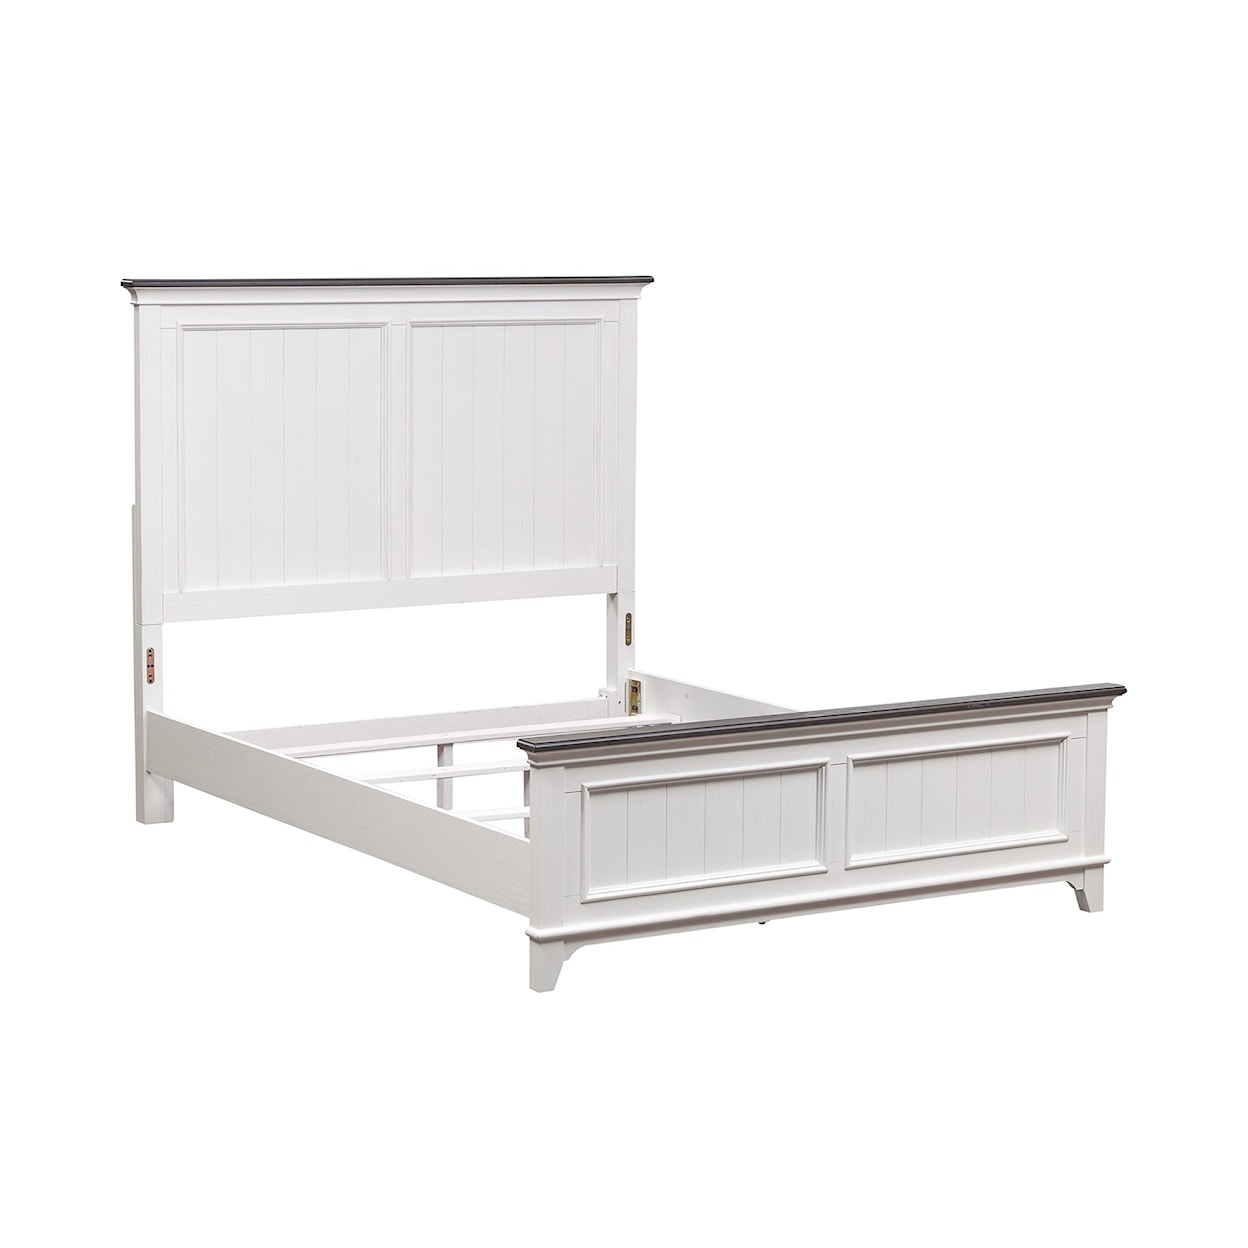 Liberty Furniture Allyson Park Full Panel Bed